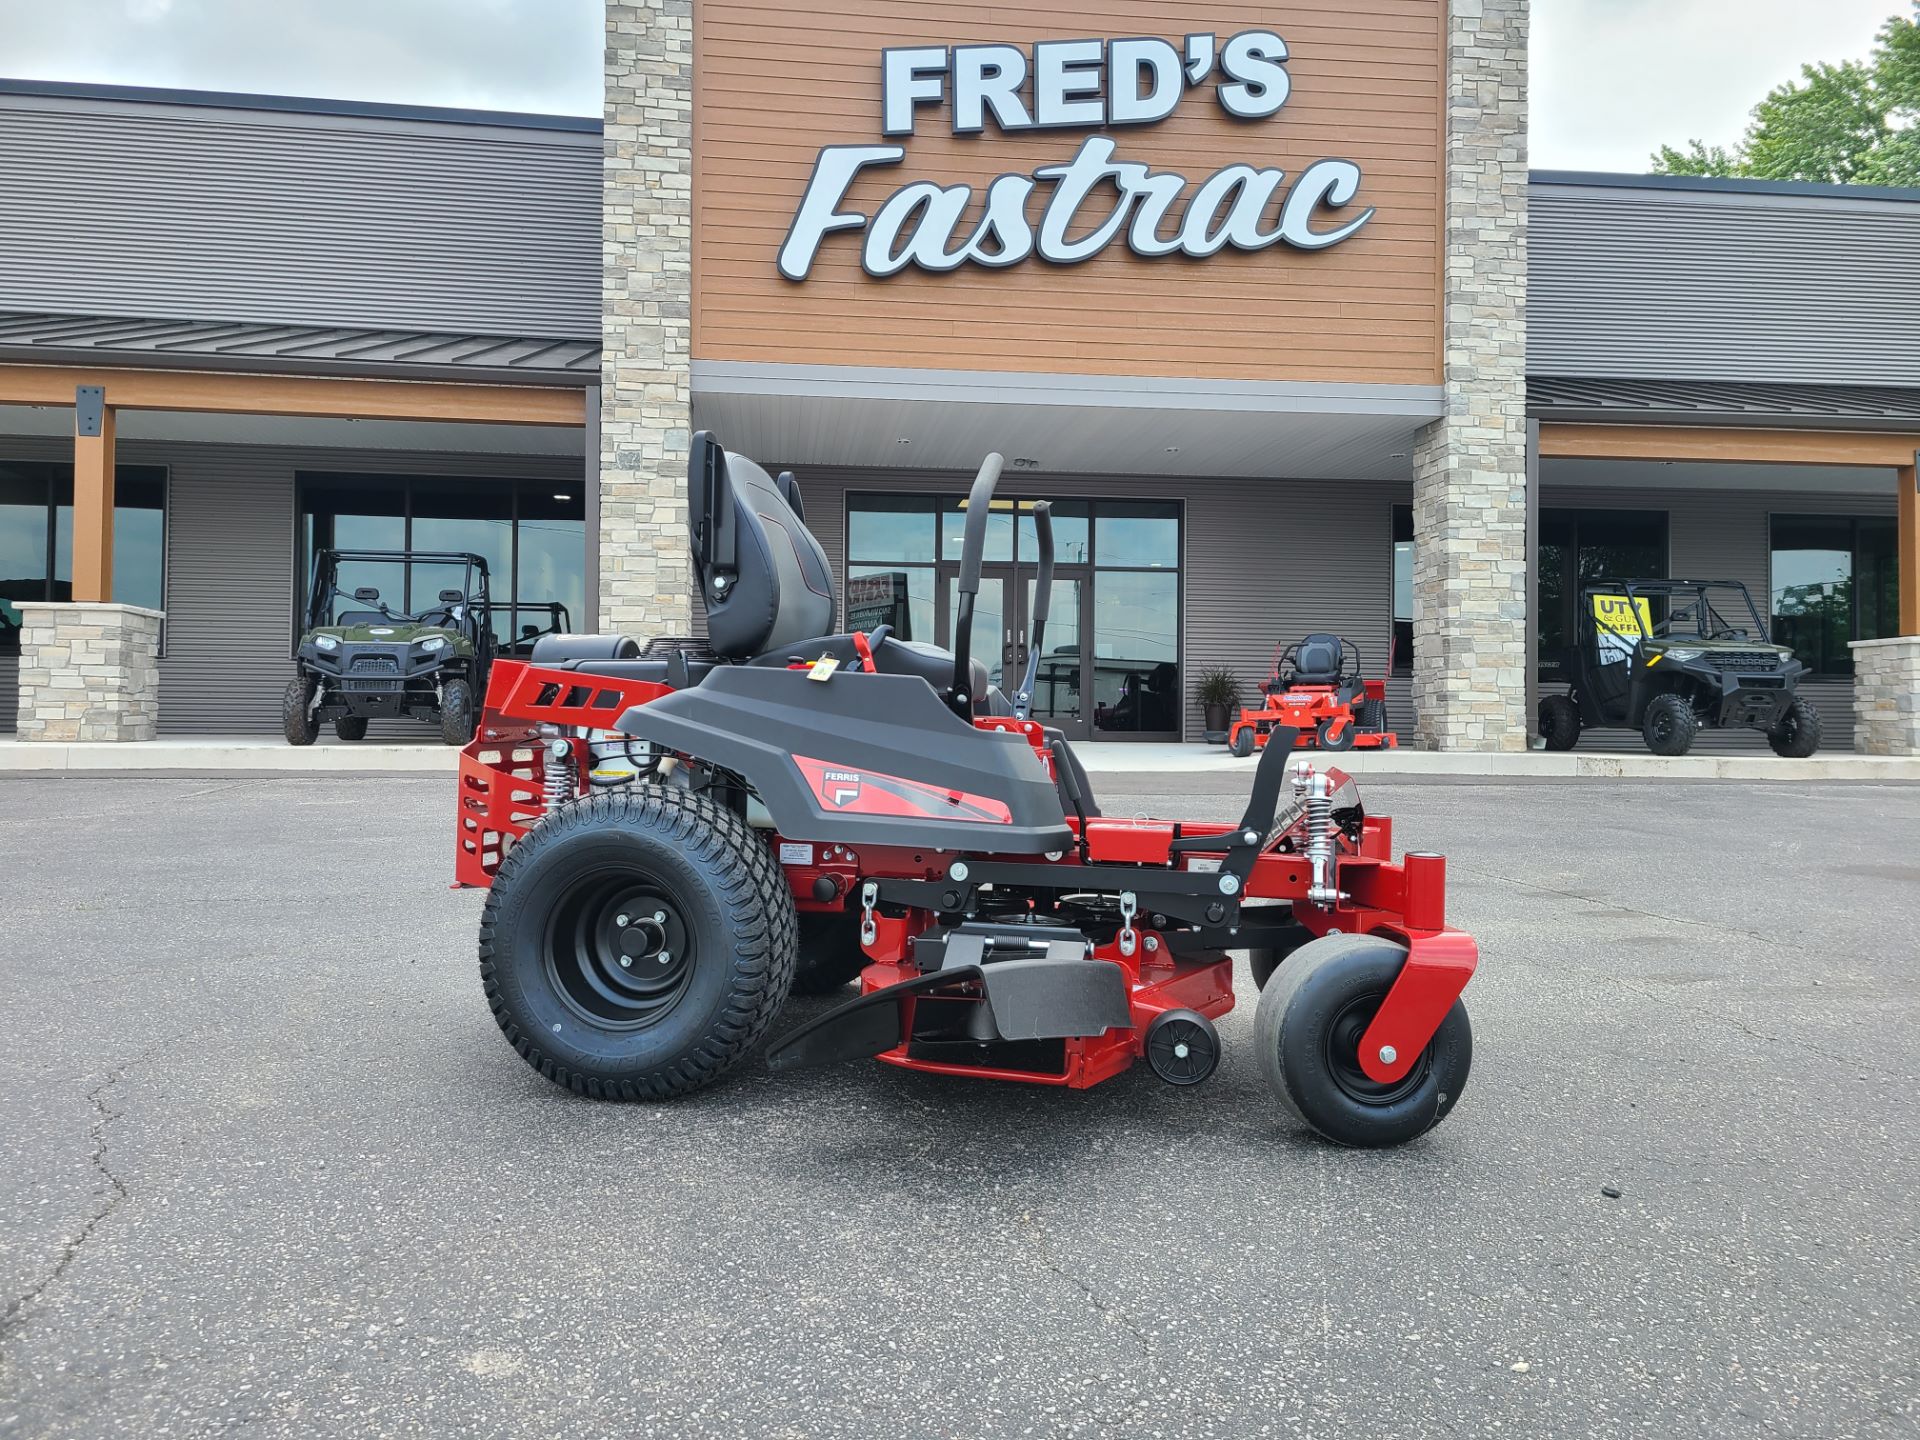 2022 Ferris Industries 500S 48 in. Briggs & Stratton Commercial 25 hp in Fond Du Lac, Wisconsin - Photo 1